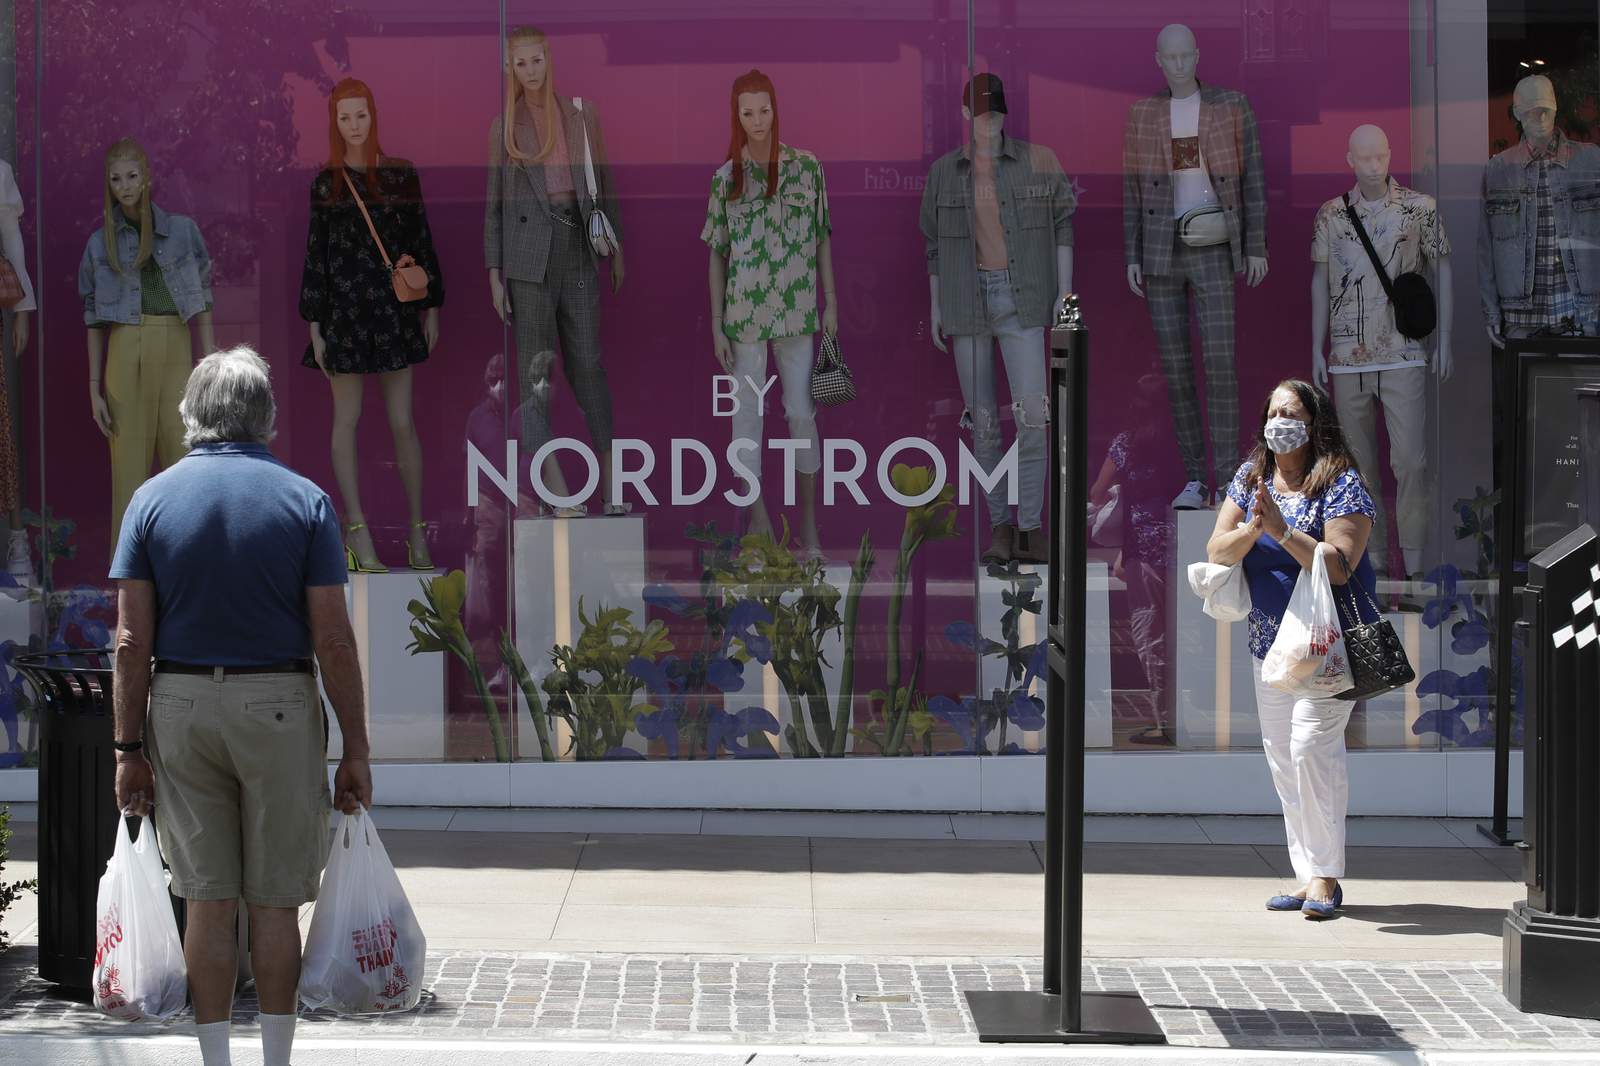 Nordstrom's 1Q sales fell 40% as pandemic shuttered stores